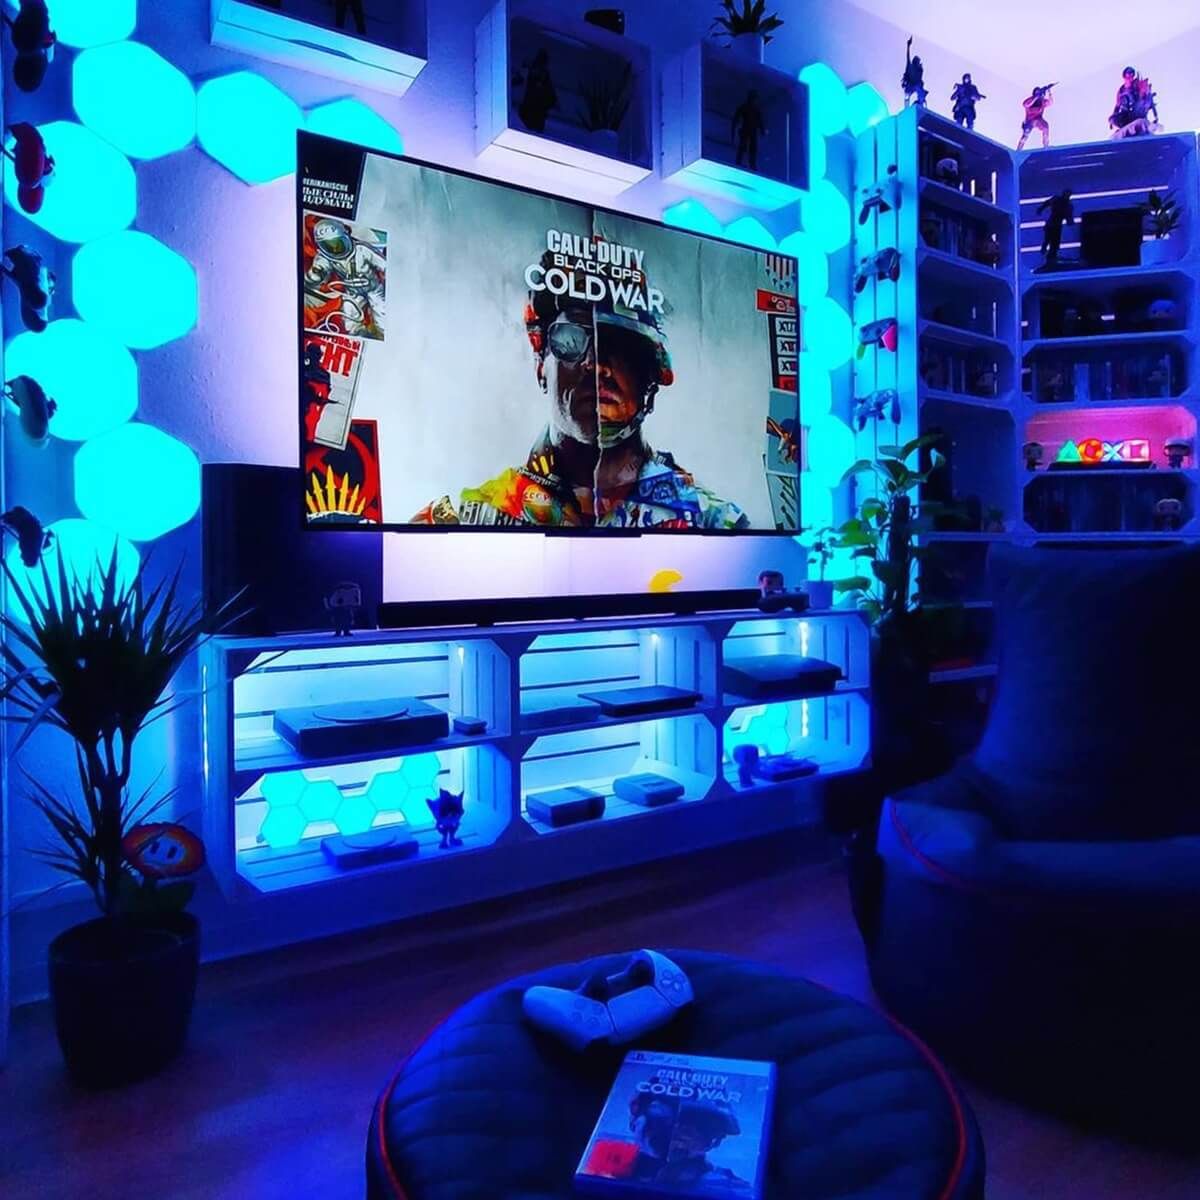 Best Gaming Entertainment Centers & Tv Stand Setup Ideas | Gridfiti With Regard To Rgb Entertainment Centers Black (View 16 of 20)